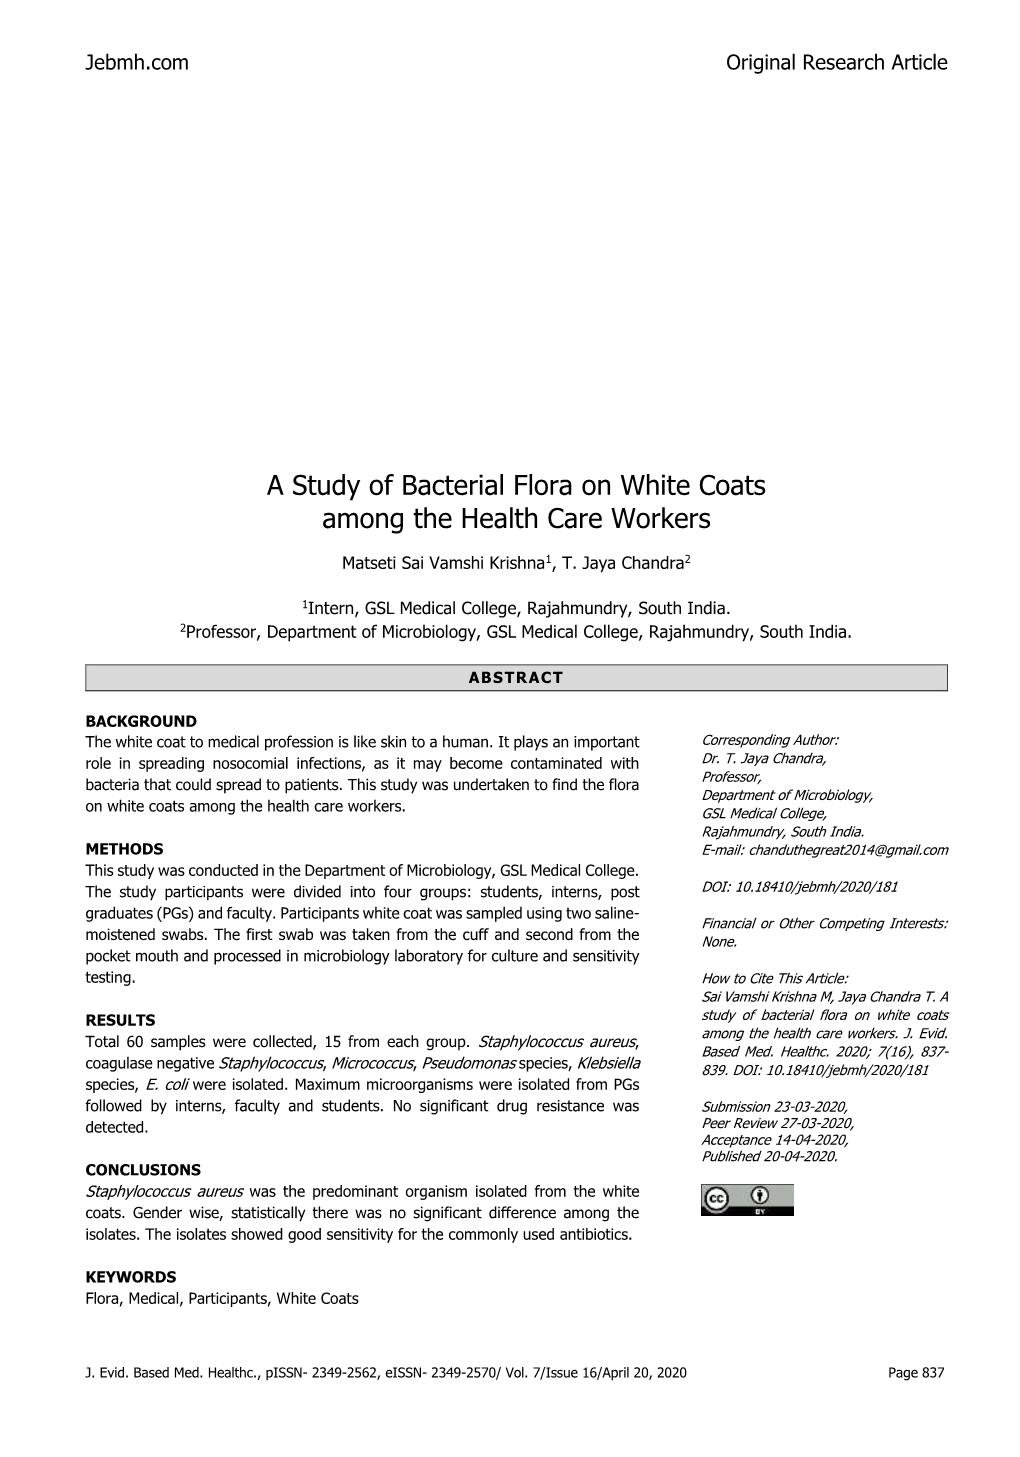 A Study of Bacterial Flora on White Coats Among the Health Care Workers